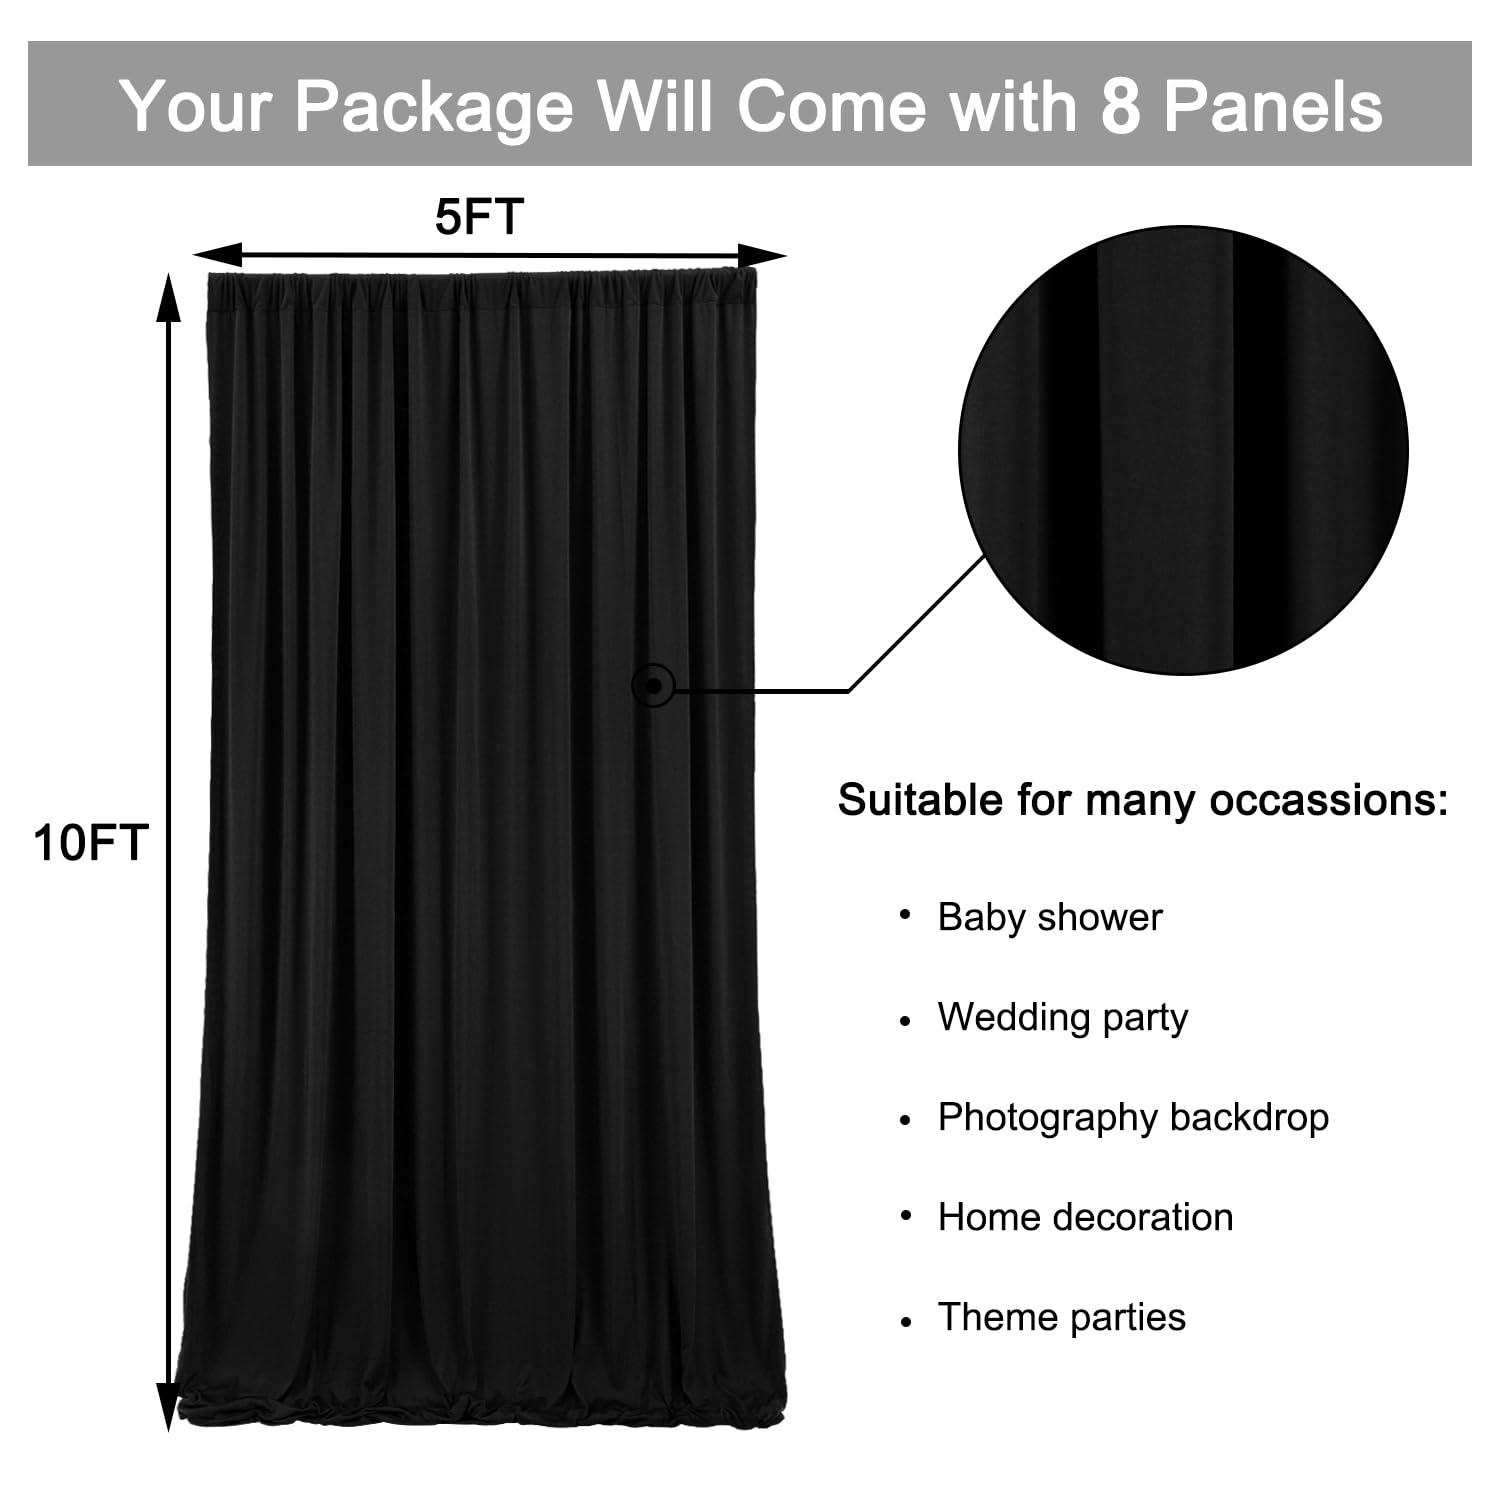 10 ft x 40 ft Wrinkle Free Black Backdrop Curtain Panels, Polyester Photography Backdrop Drapes, Wedding Party Home Decoration Supplies